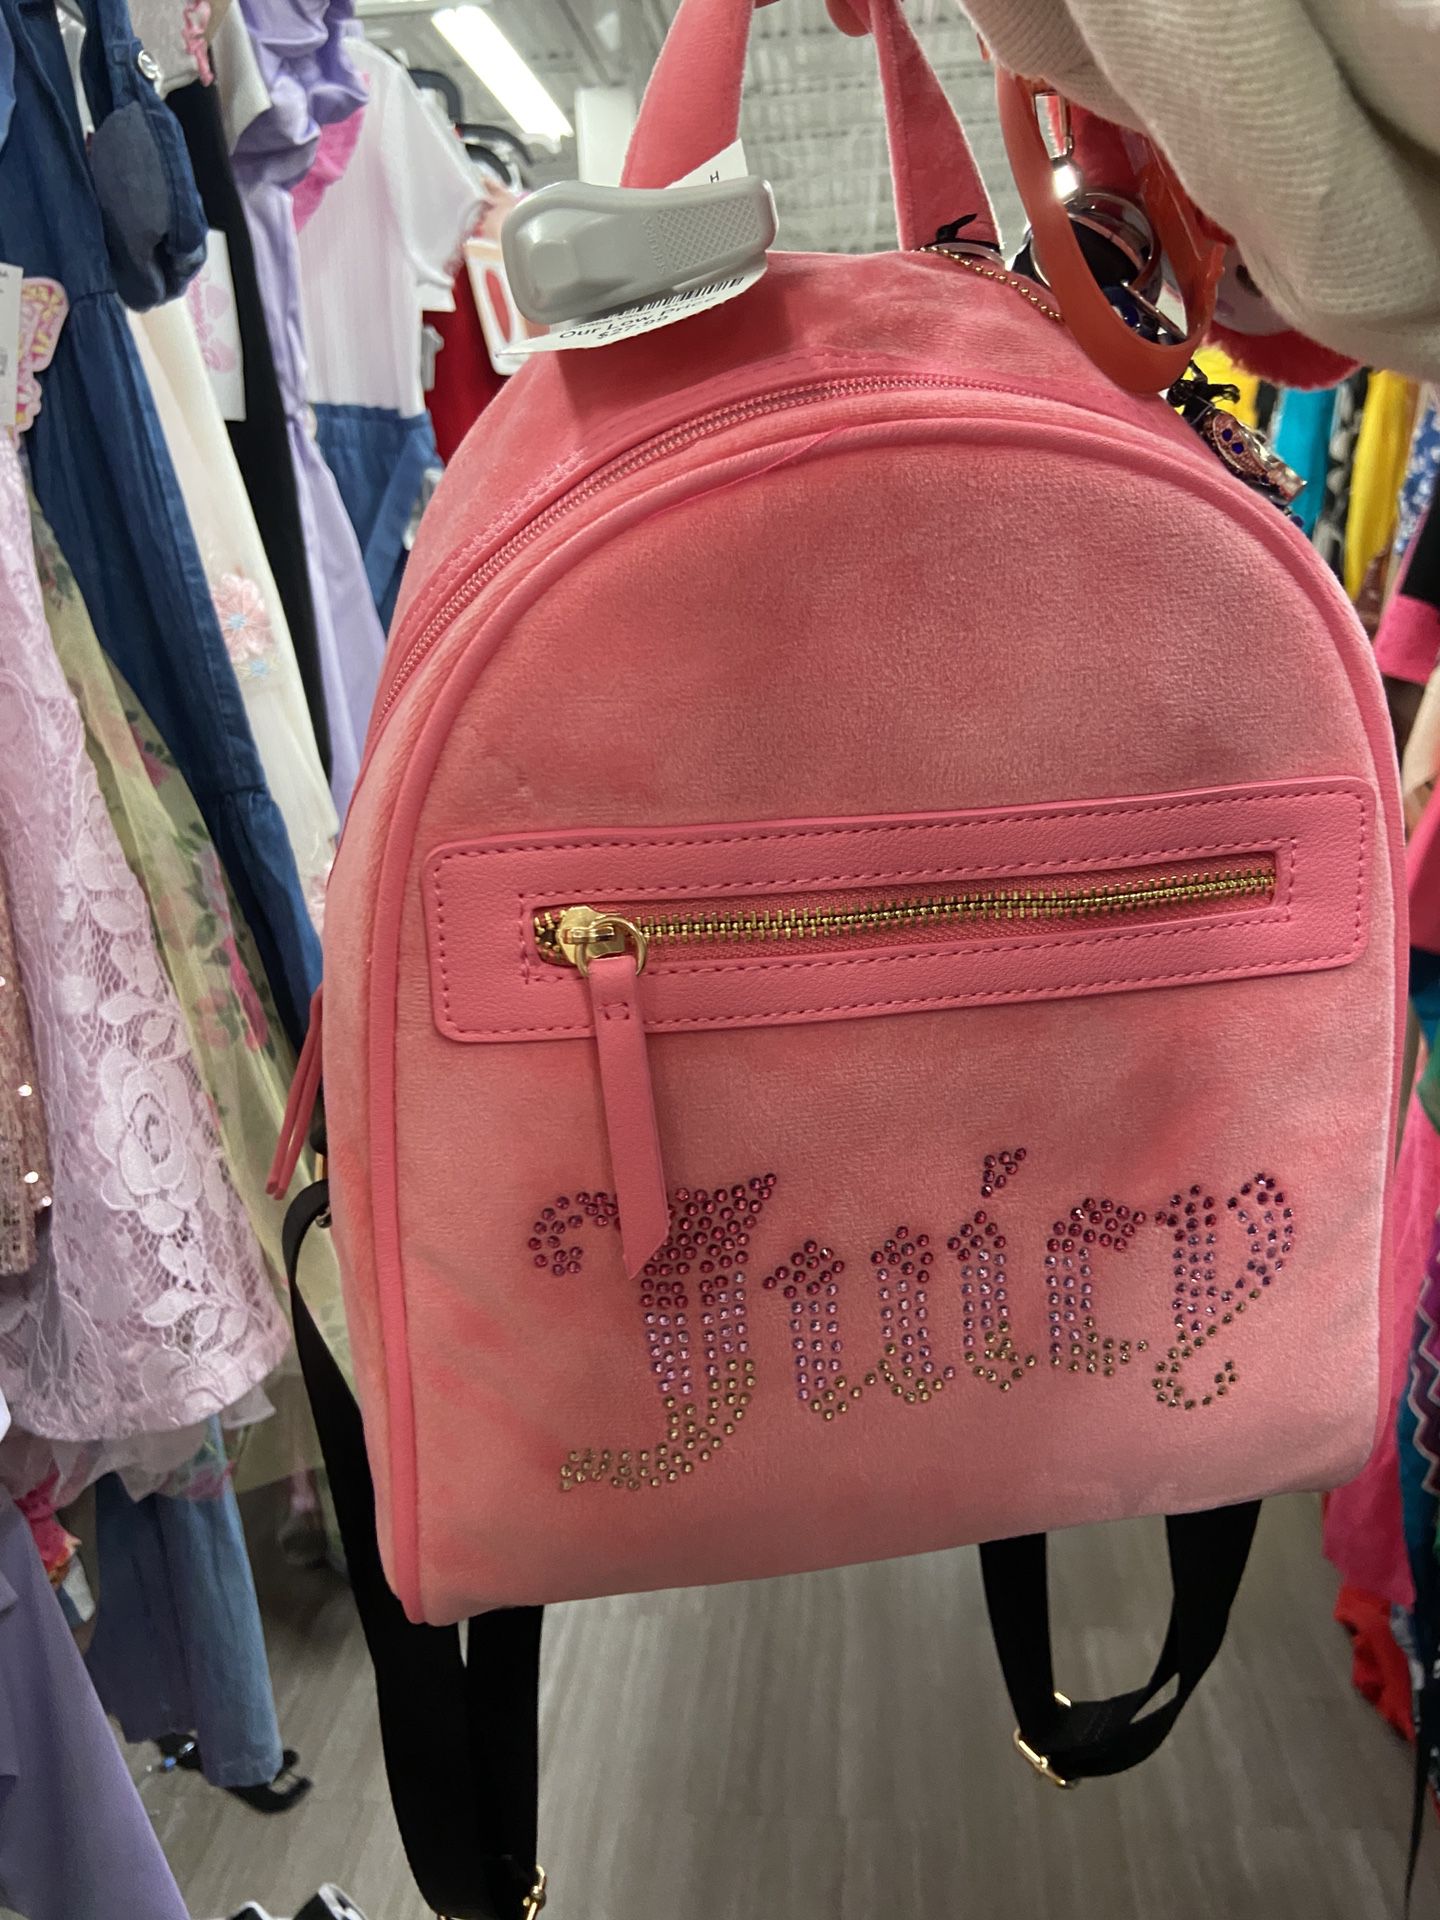 new hot pink juicy velour backpack !